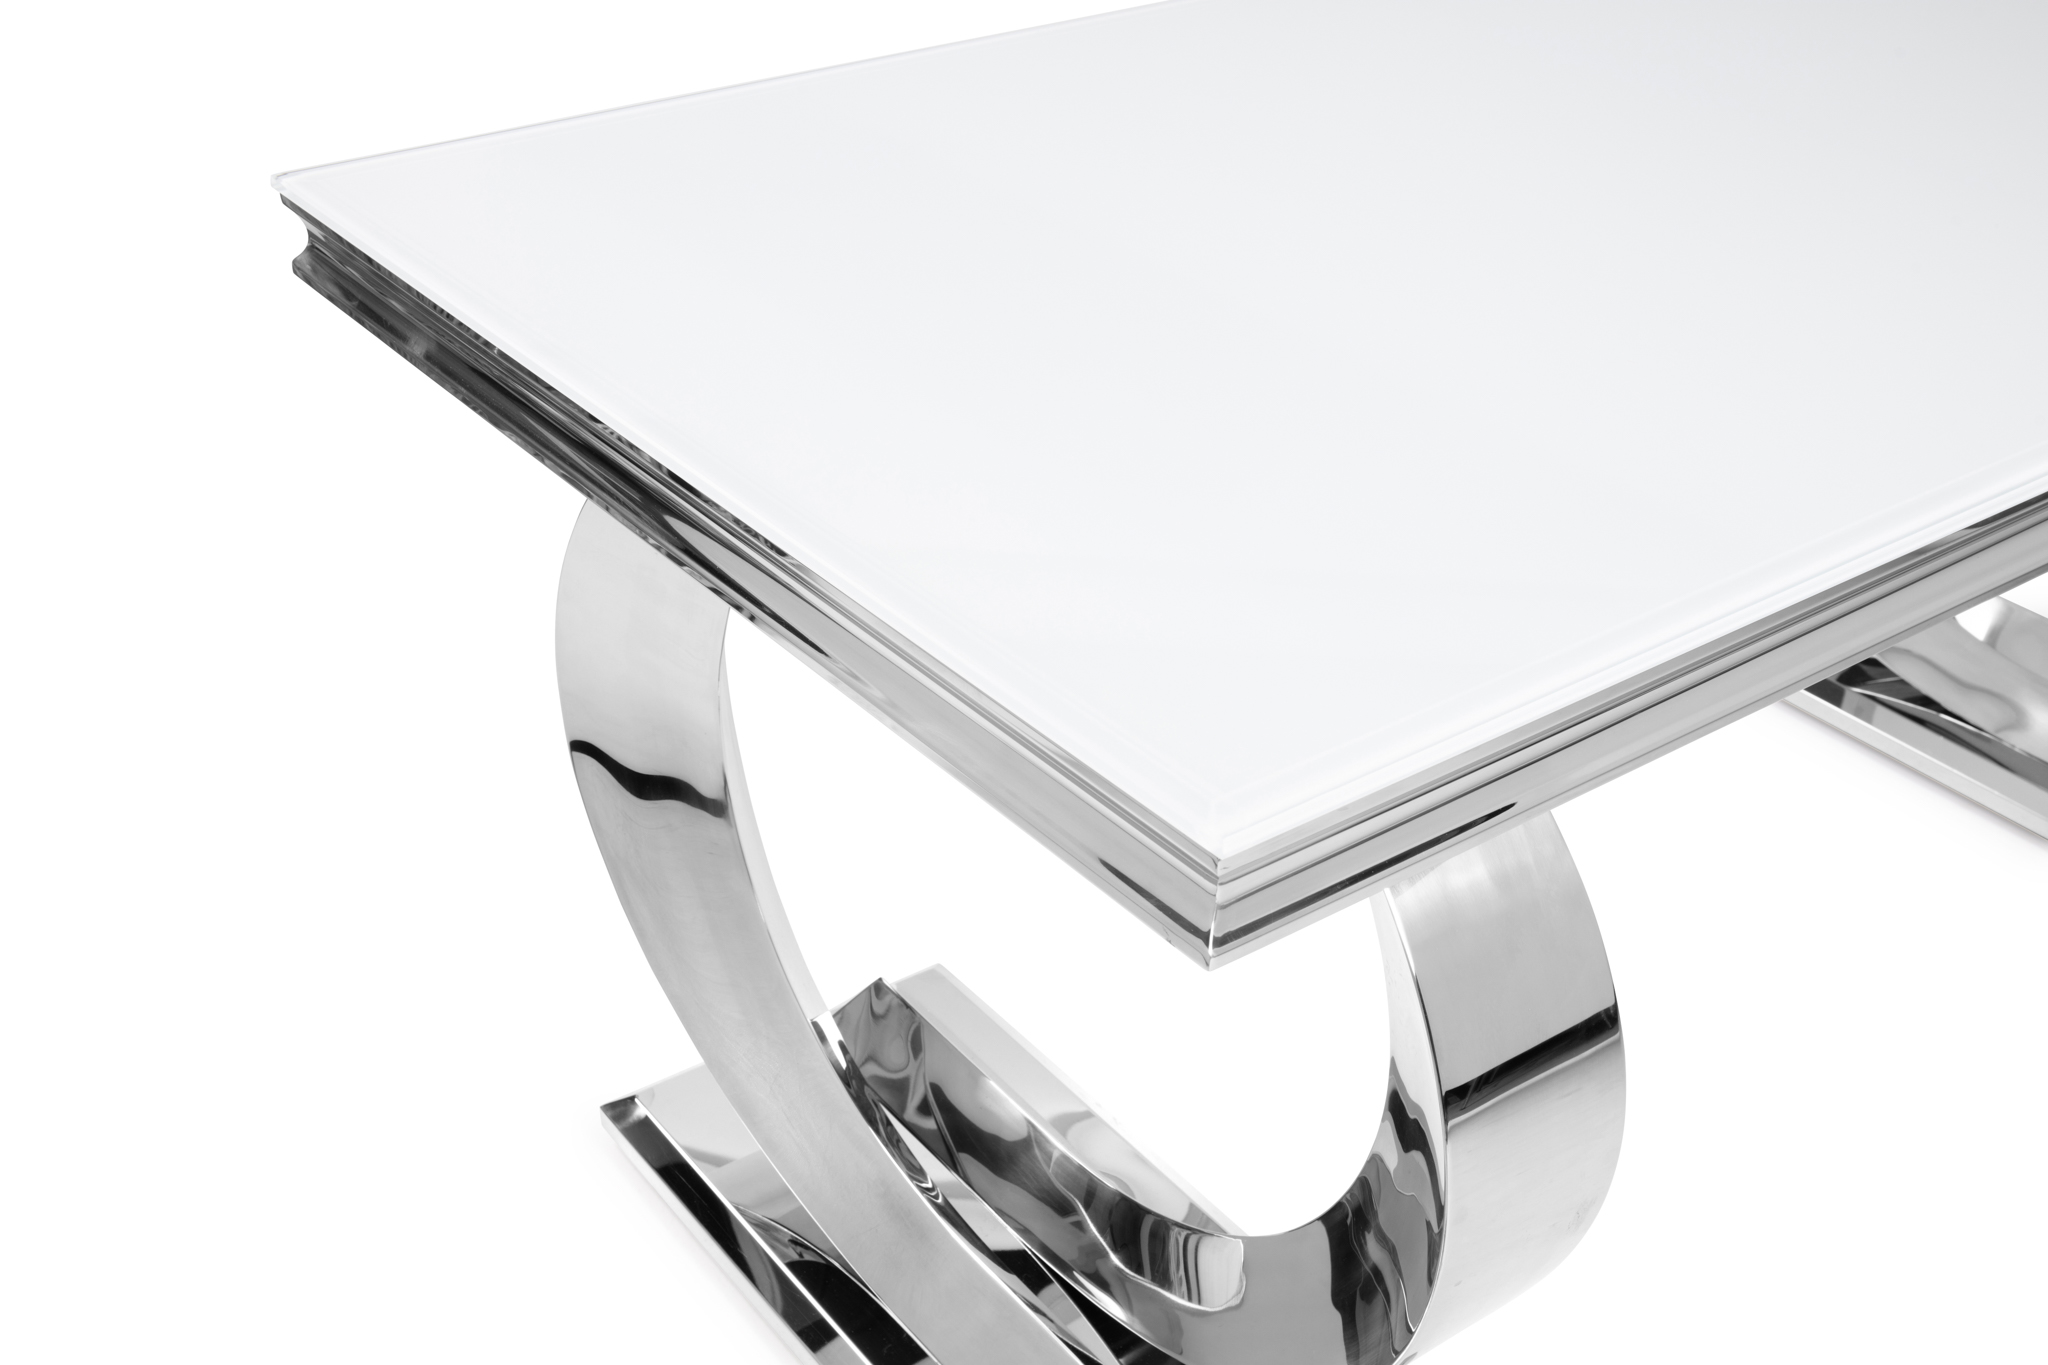 1.8M Pisa Polished Steel Dining Table with Set Glass Top in White